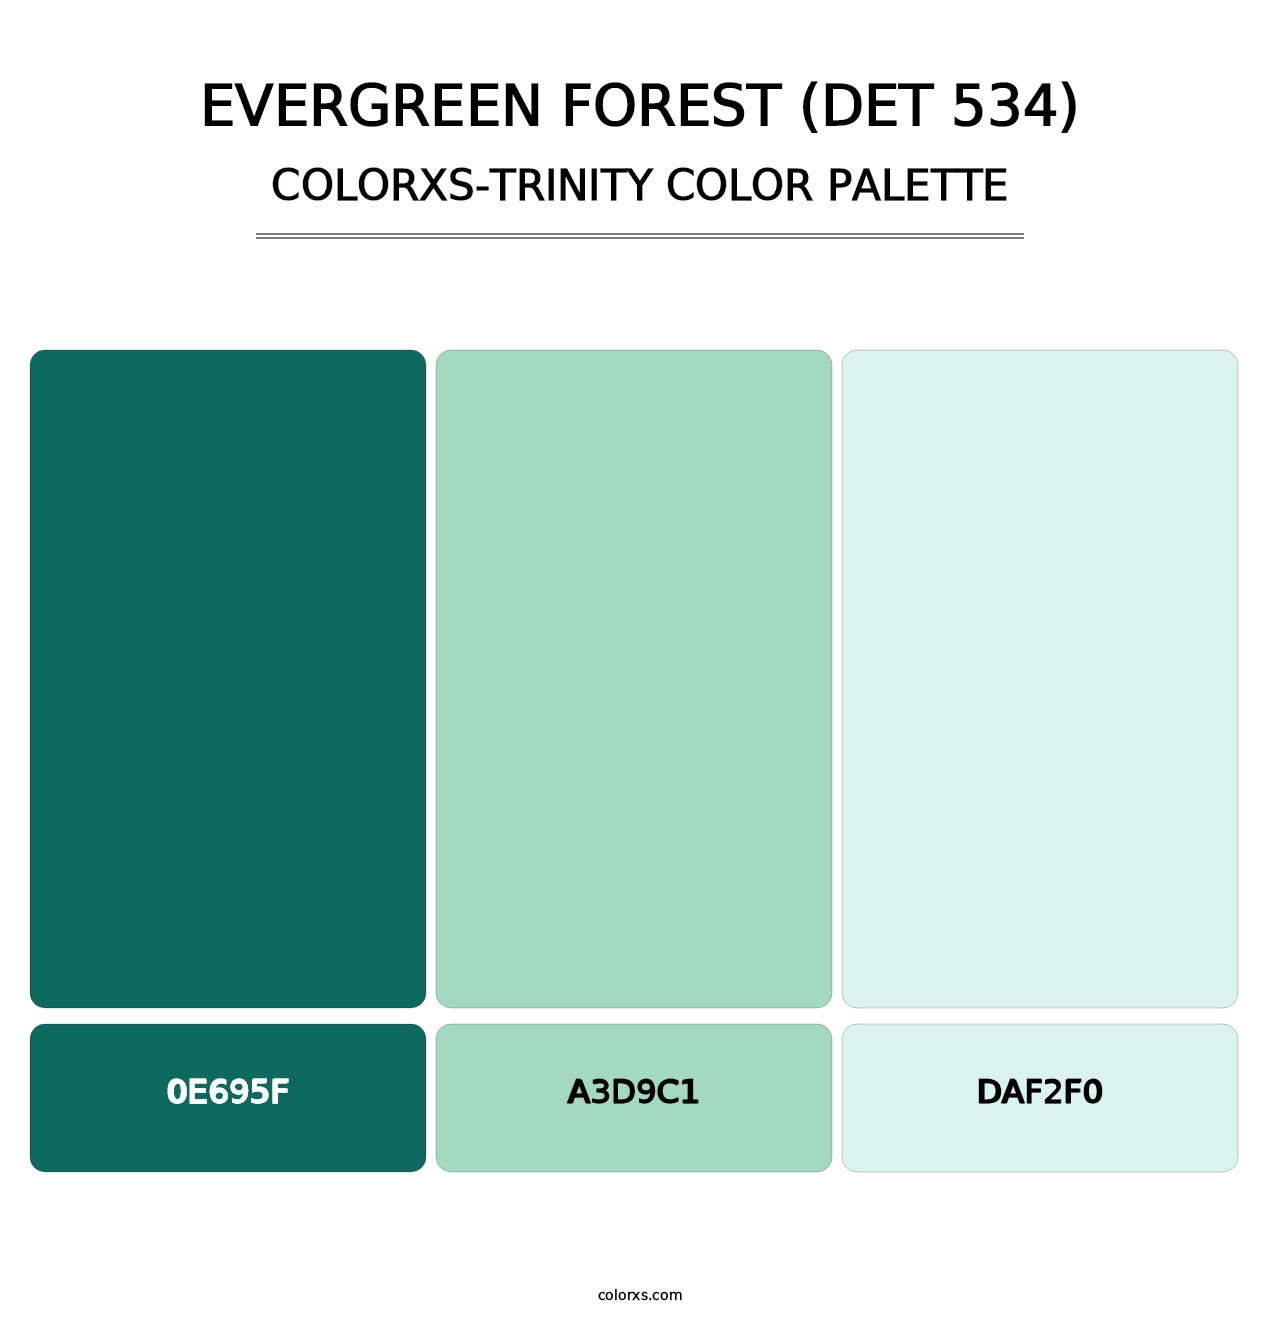 Evergreen Forest (DET 534) - Colorxs Trinity Palette